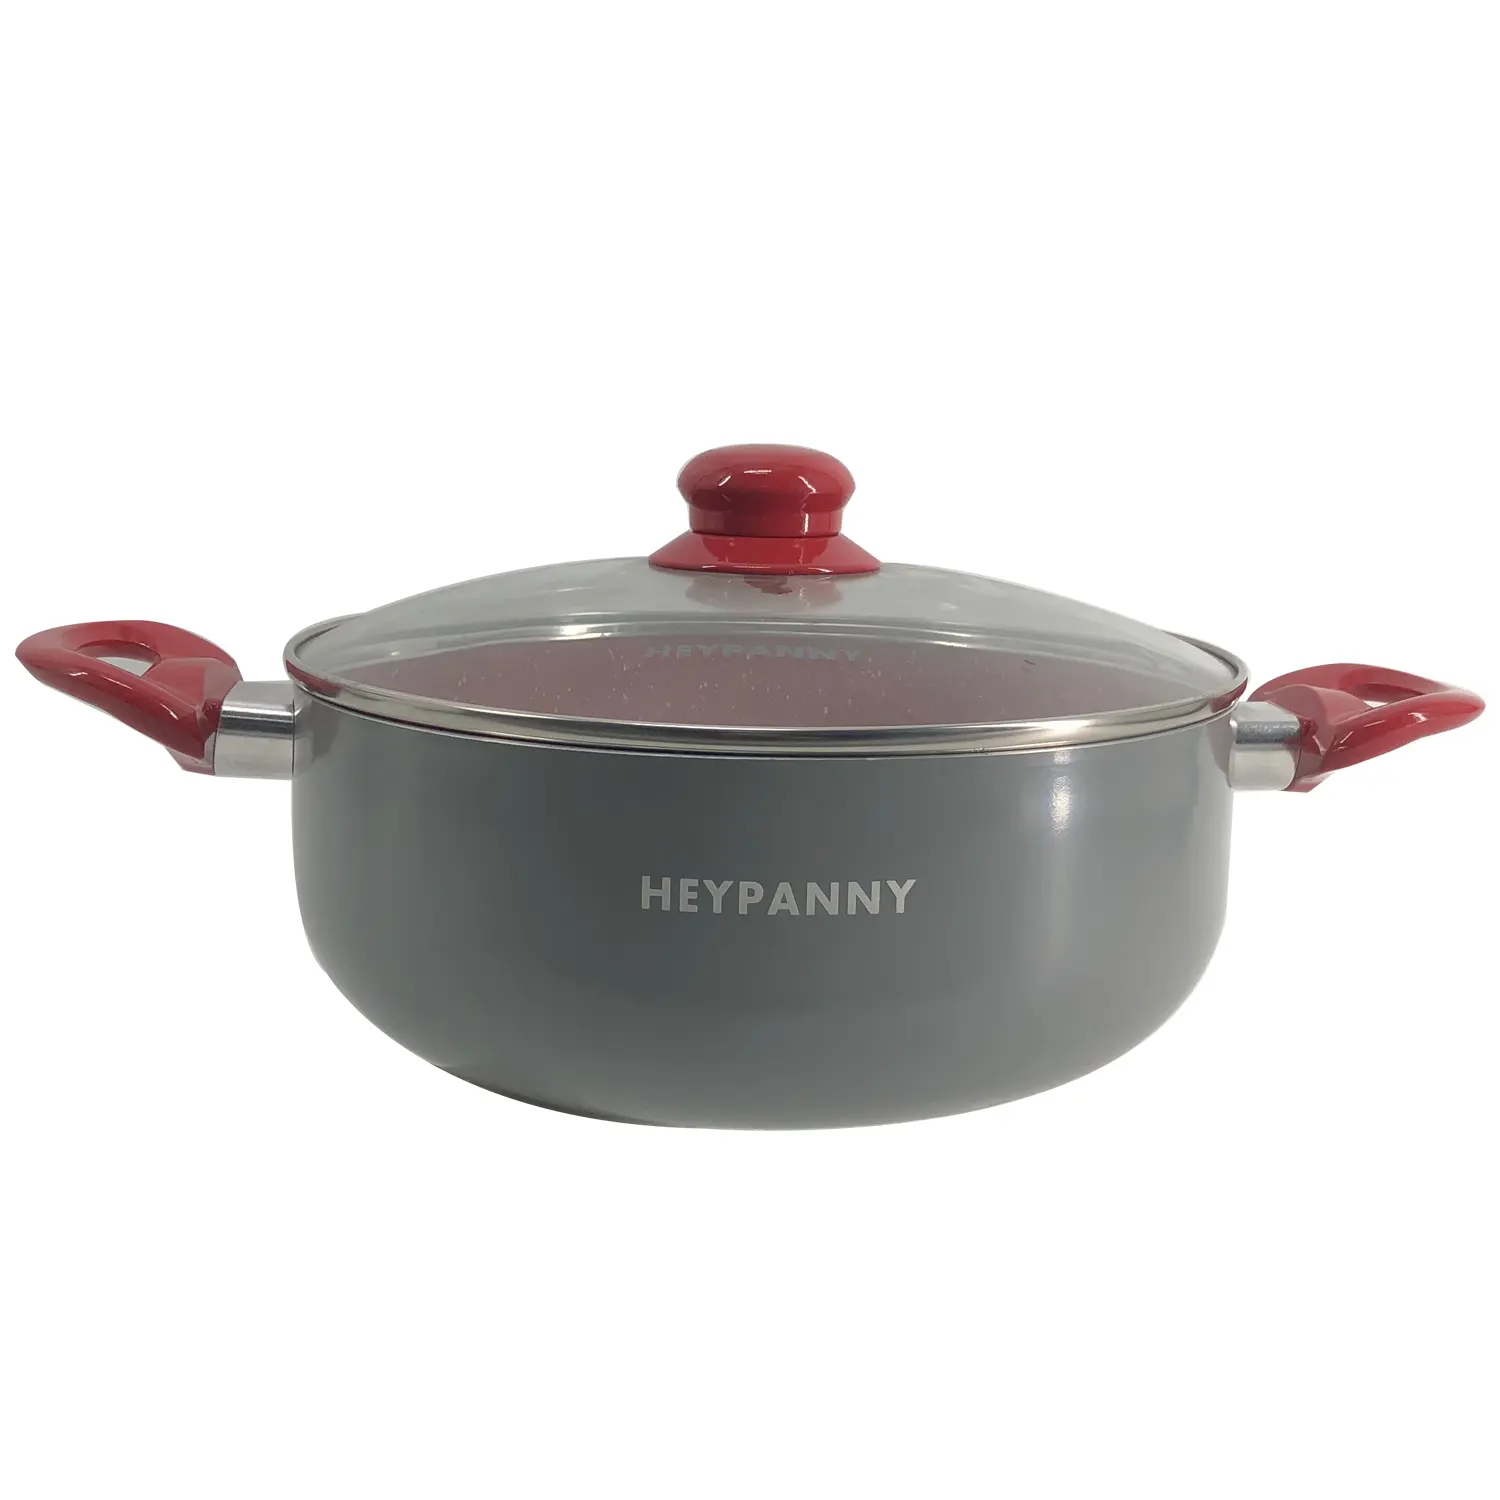 HEYPANNY Easy cleaning aluminum popular nonstick sauce pot press aluminum high quality with cover sauce pot